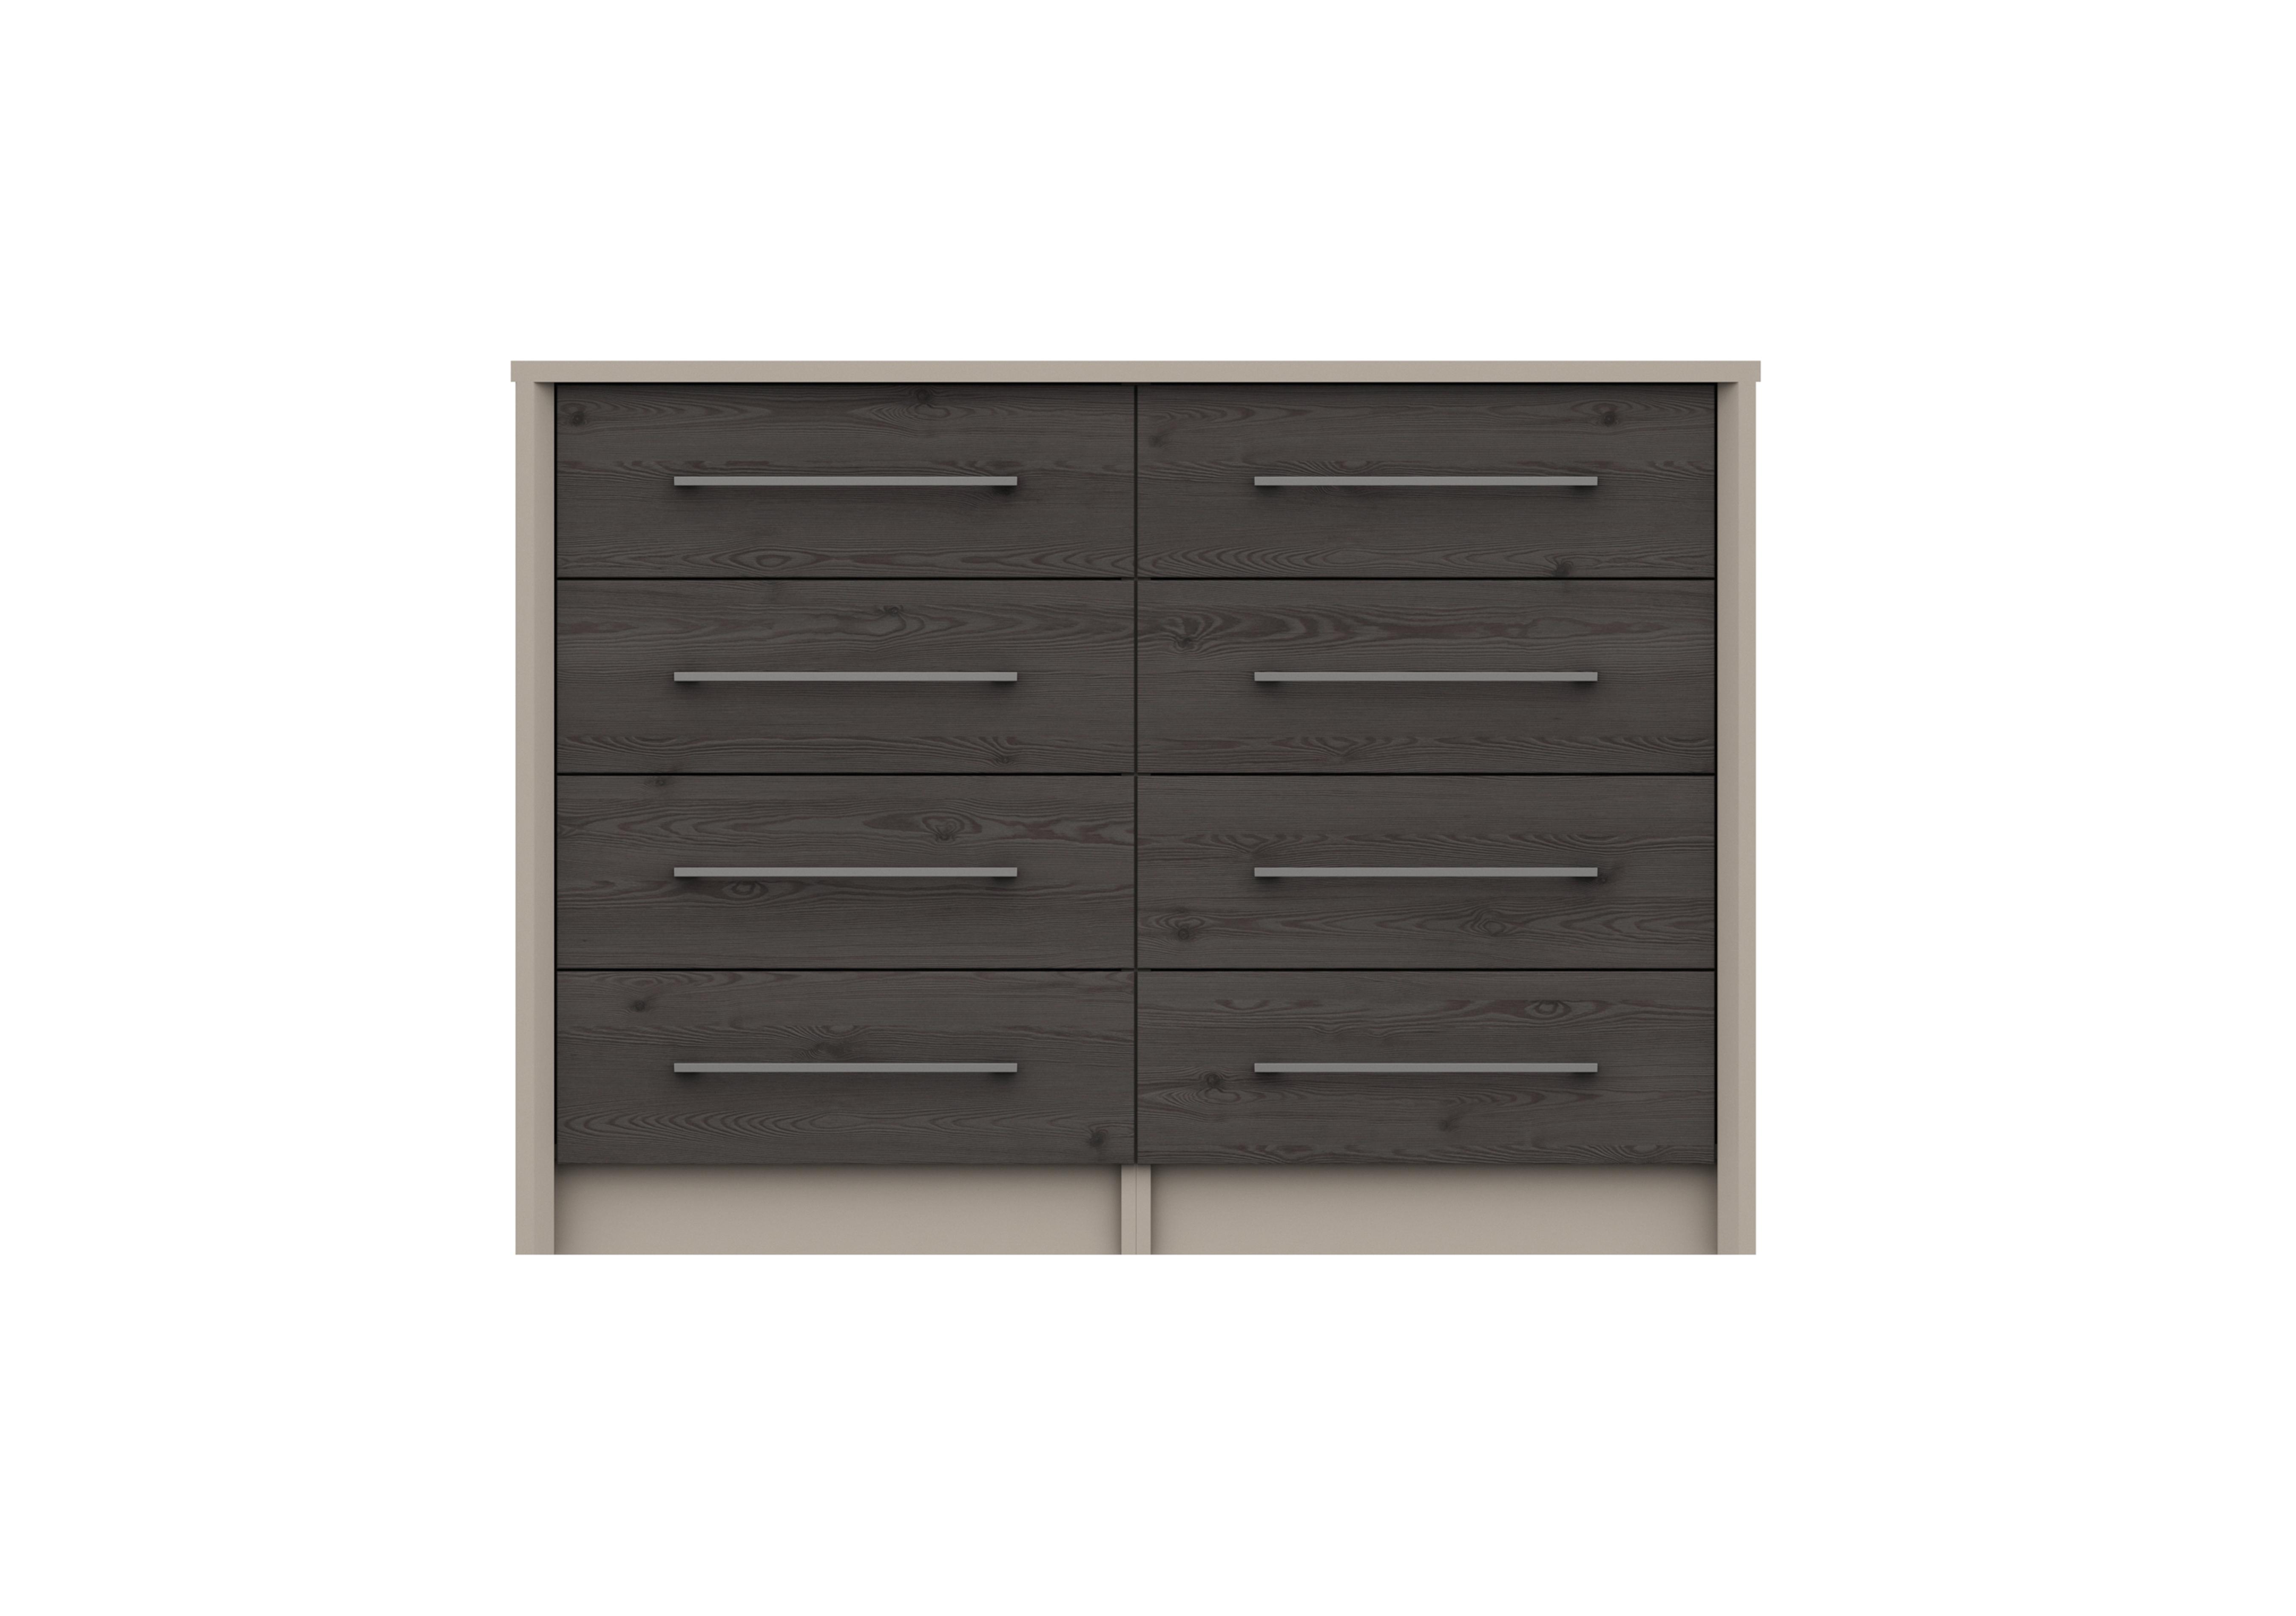 Paddington 8 Drawer Wide Chest in Fired Earth/Anthracite Larch on Furniture Village